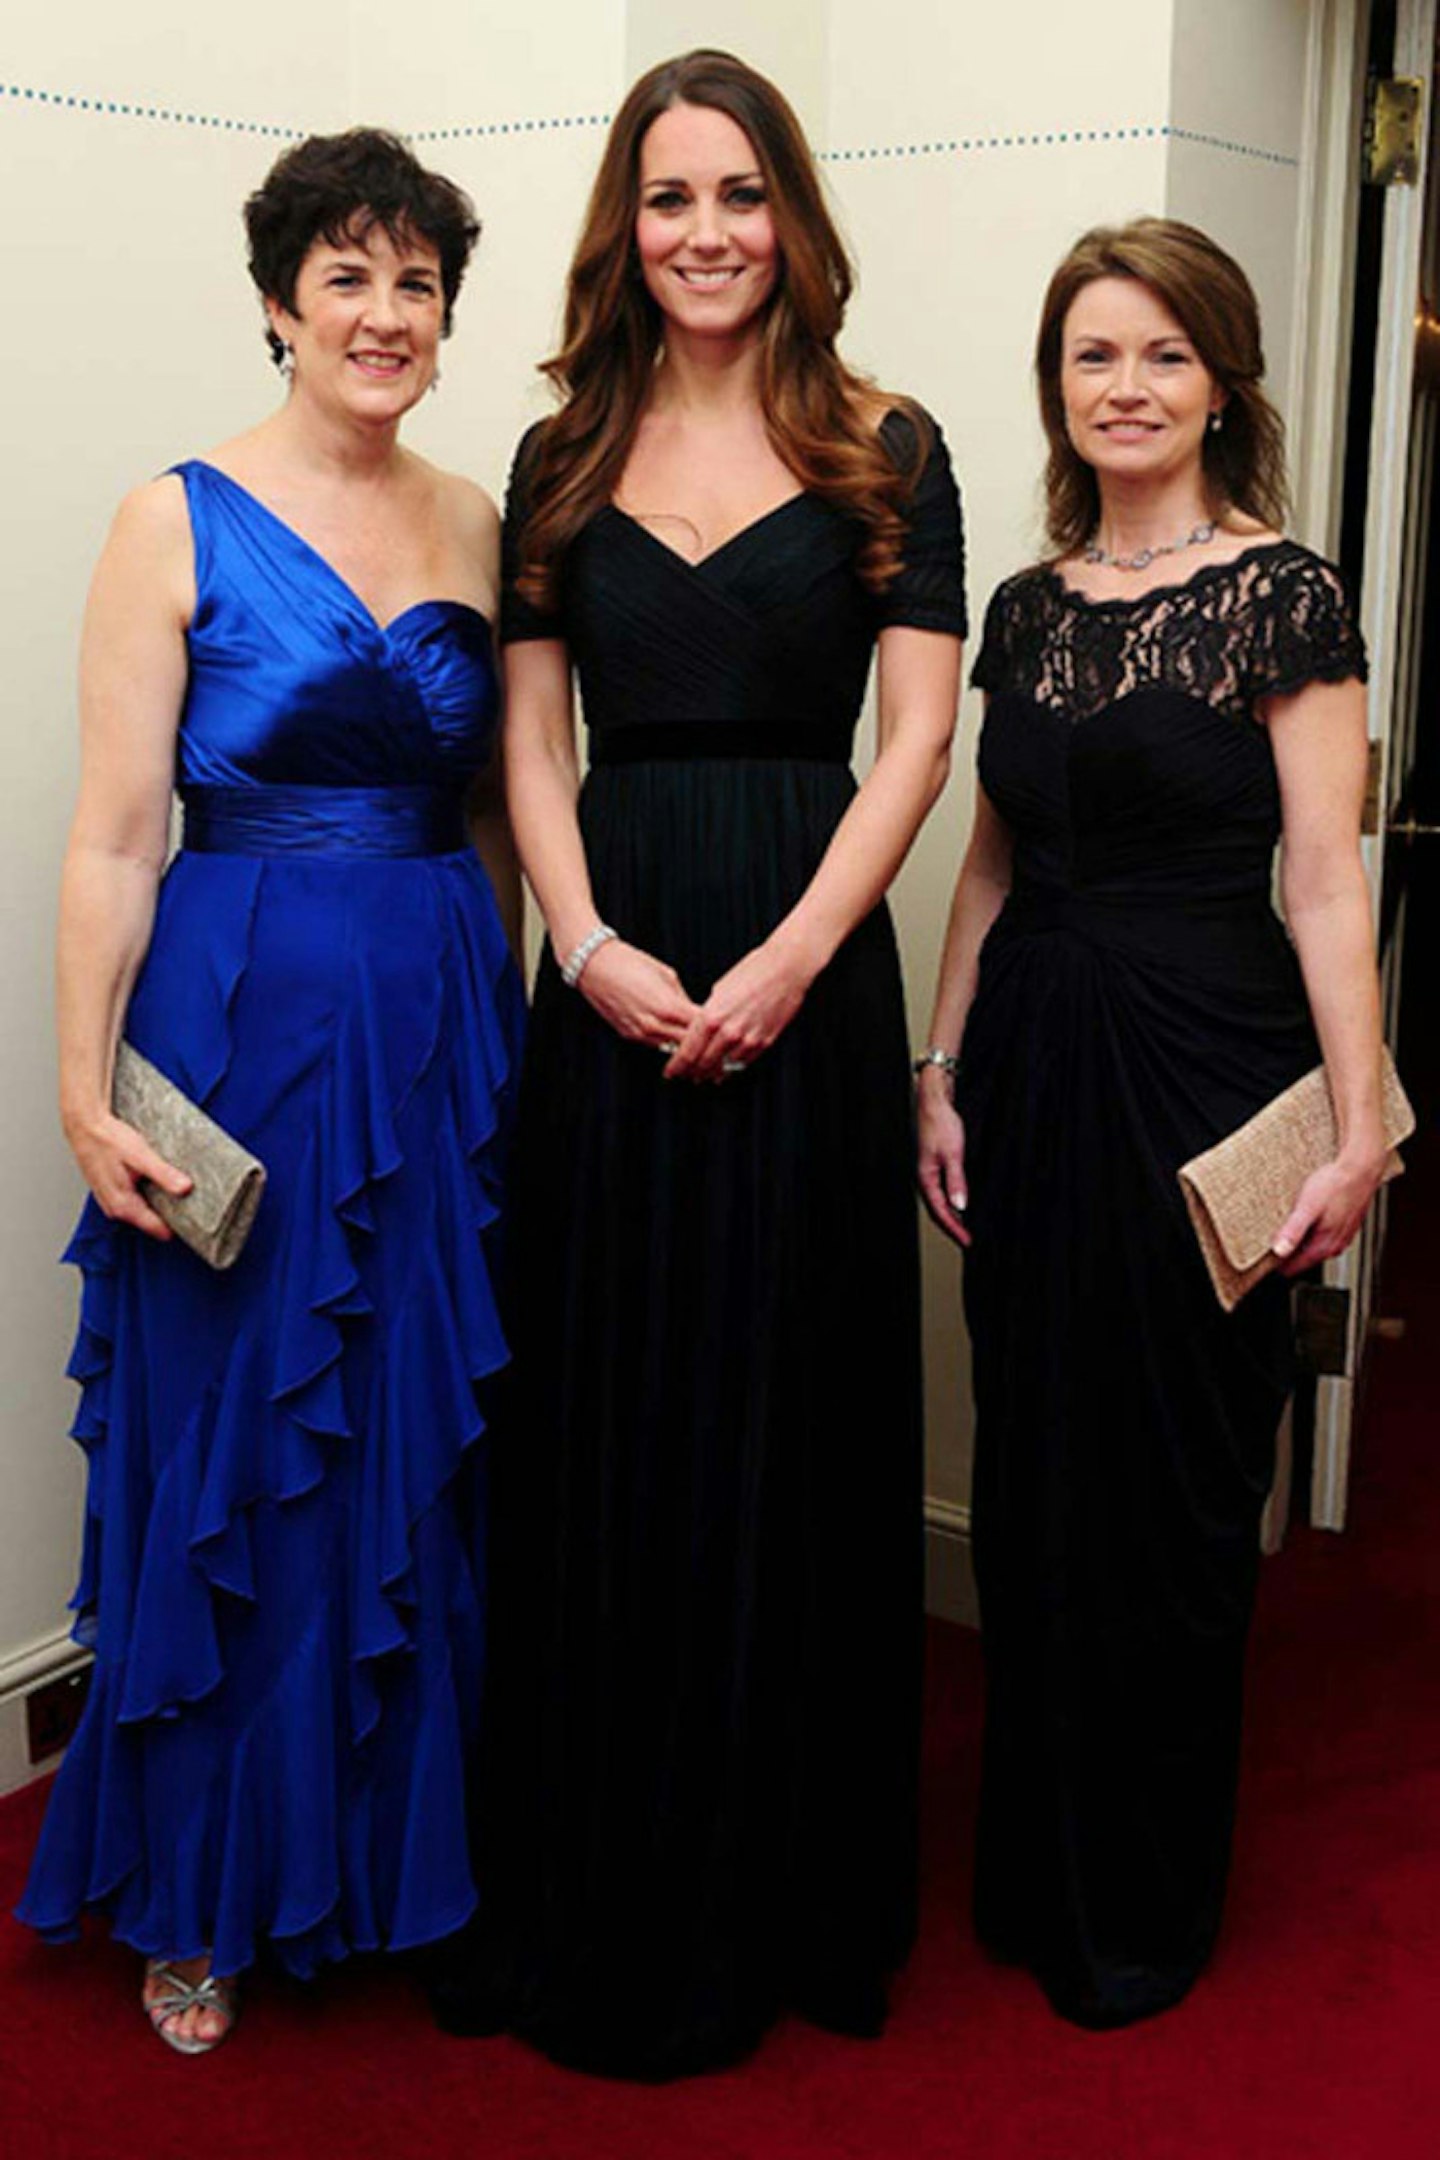 The Duchess of Cambridge wears Jenny Packham for The 100 Women In Hedge Funds Gala Dinner, 24 October 2013